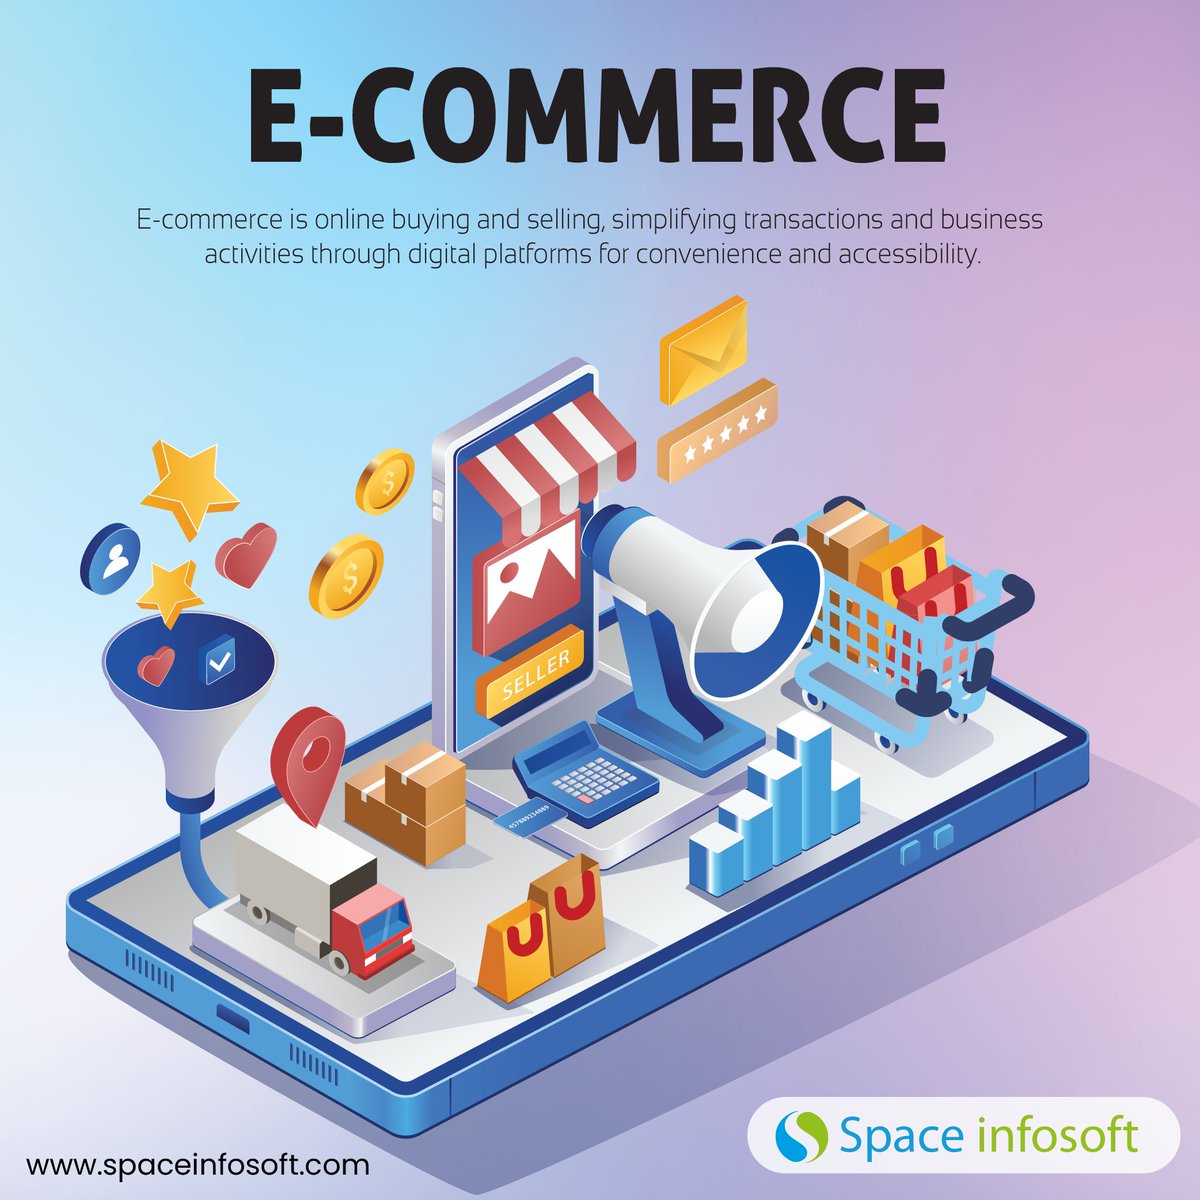 Discover a world of convenience and choice with our e-commerce platform. Browse, click, and shop your favorite products from the comfort of your home.
.
.
#spaceinfosoft #shoping #productdesign #ecomplatforms #ecommercestore 🛒📦🛒